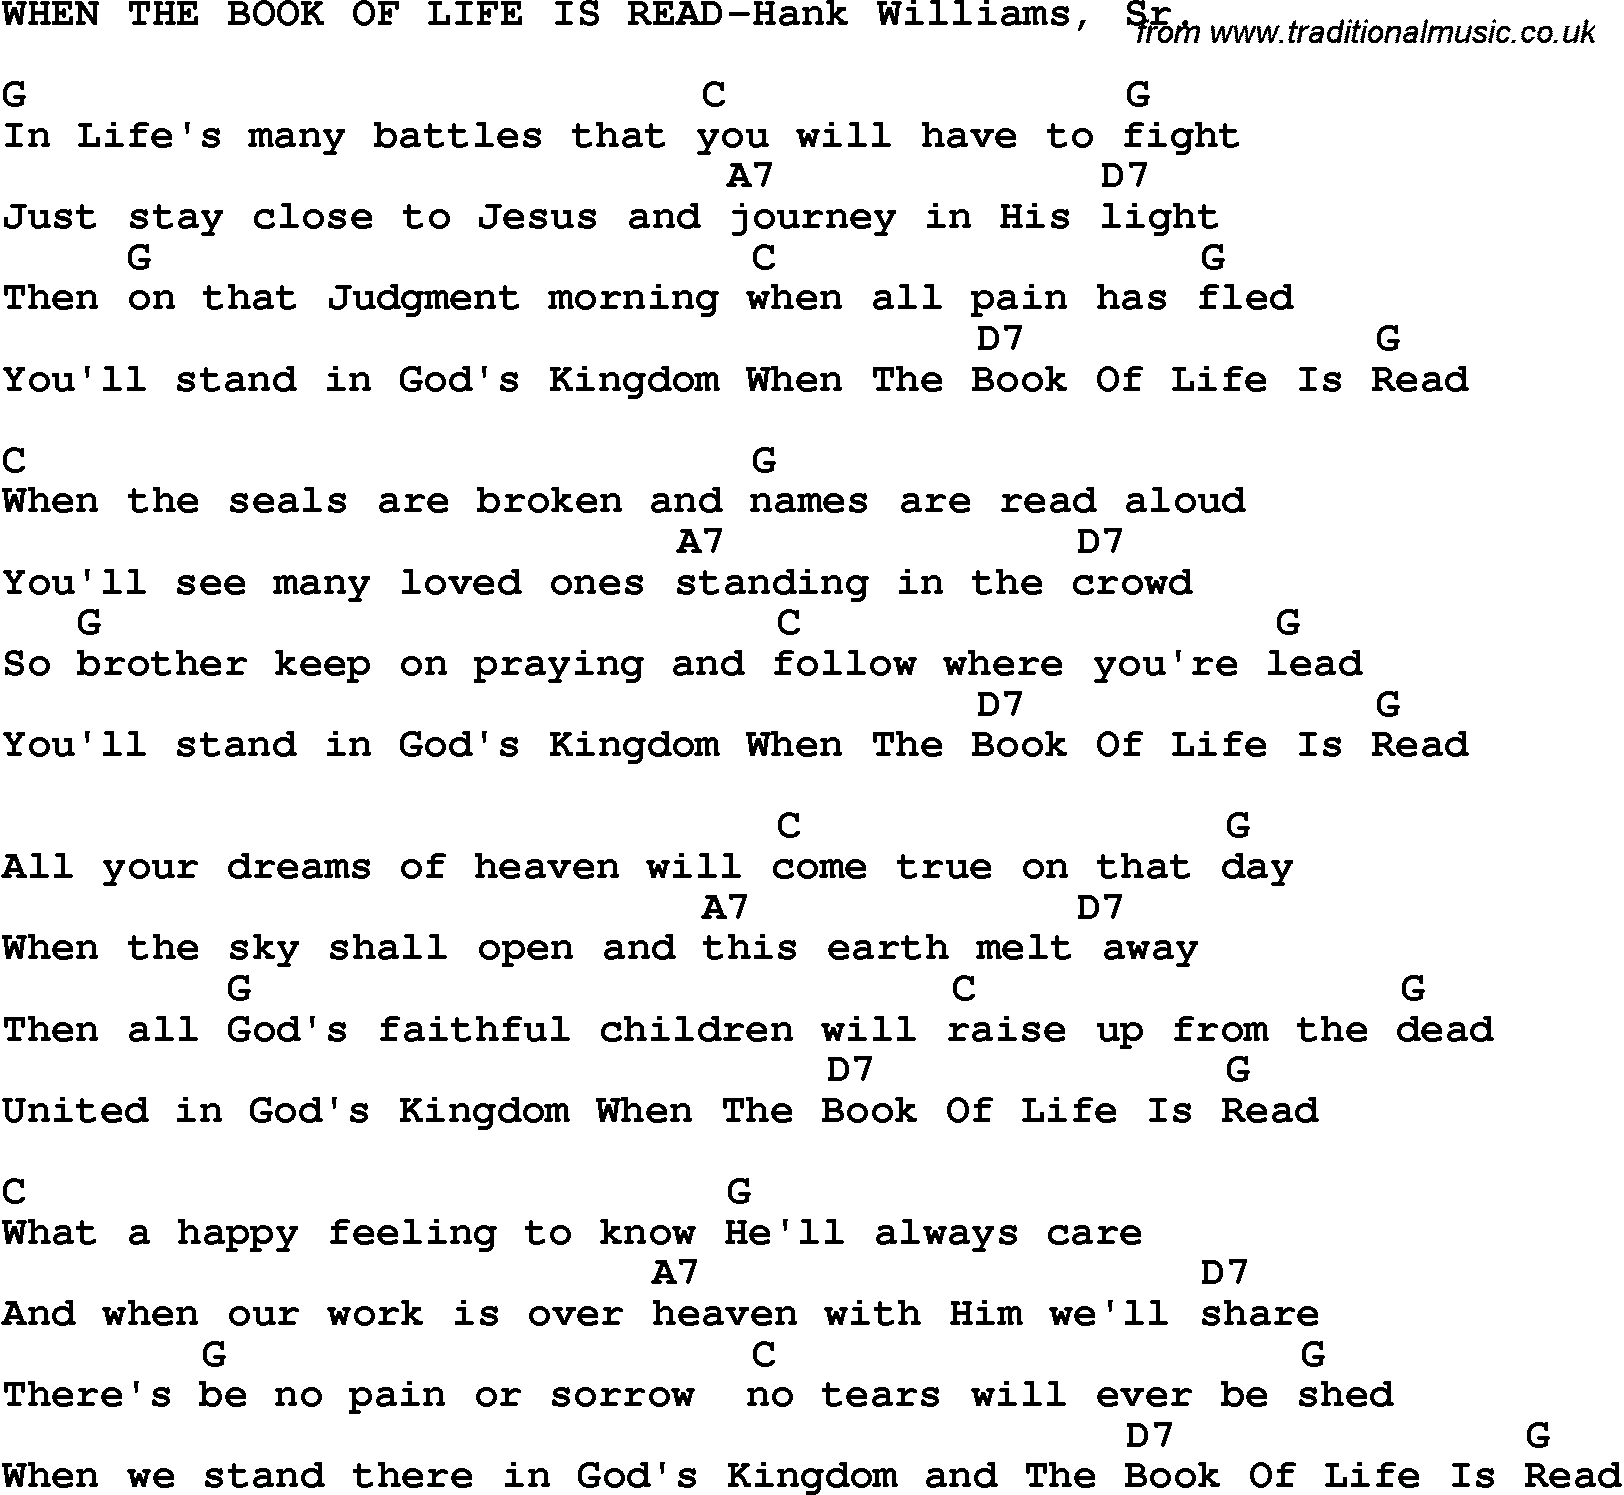 Country, Southern and Bluegrass Gospel Song WHEN THE BOOK OF LIFE IS READ-Hank Williams, Sr lyrics and chords